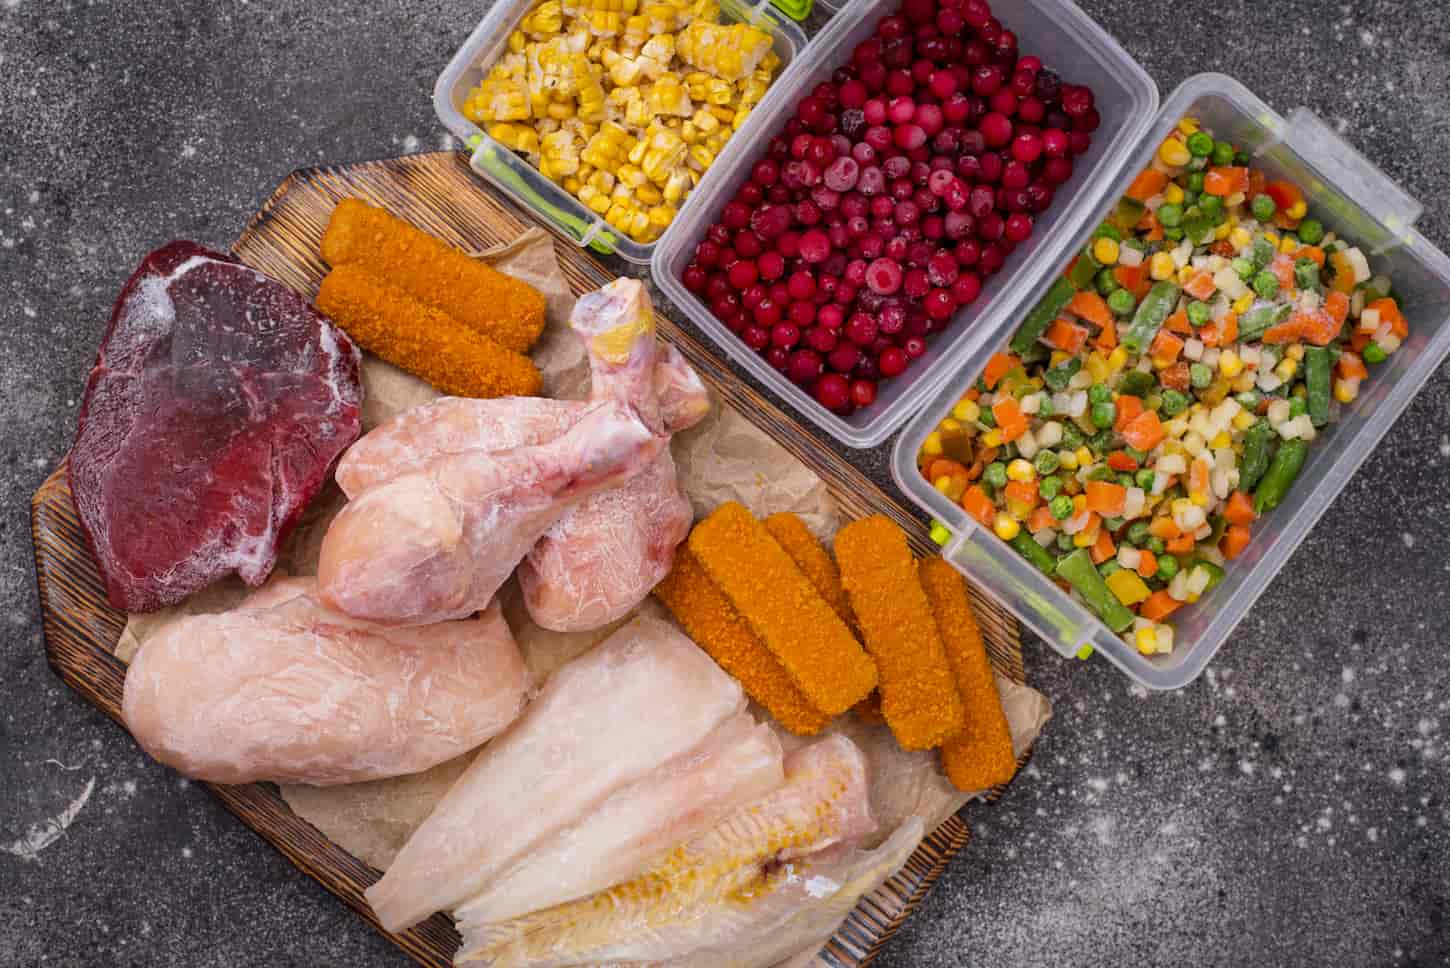 An image of various frozen vegetable products in containers, and various frozen meat in a wooden chopping board.